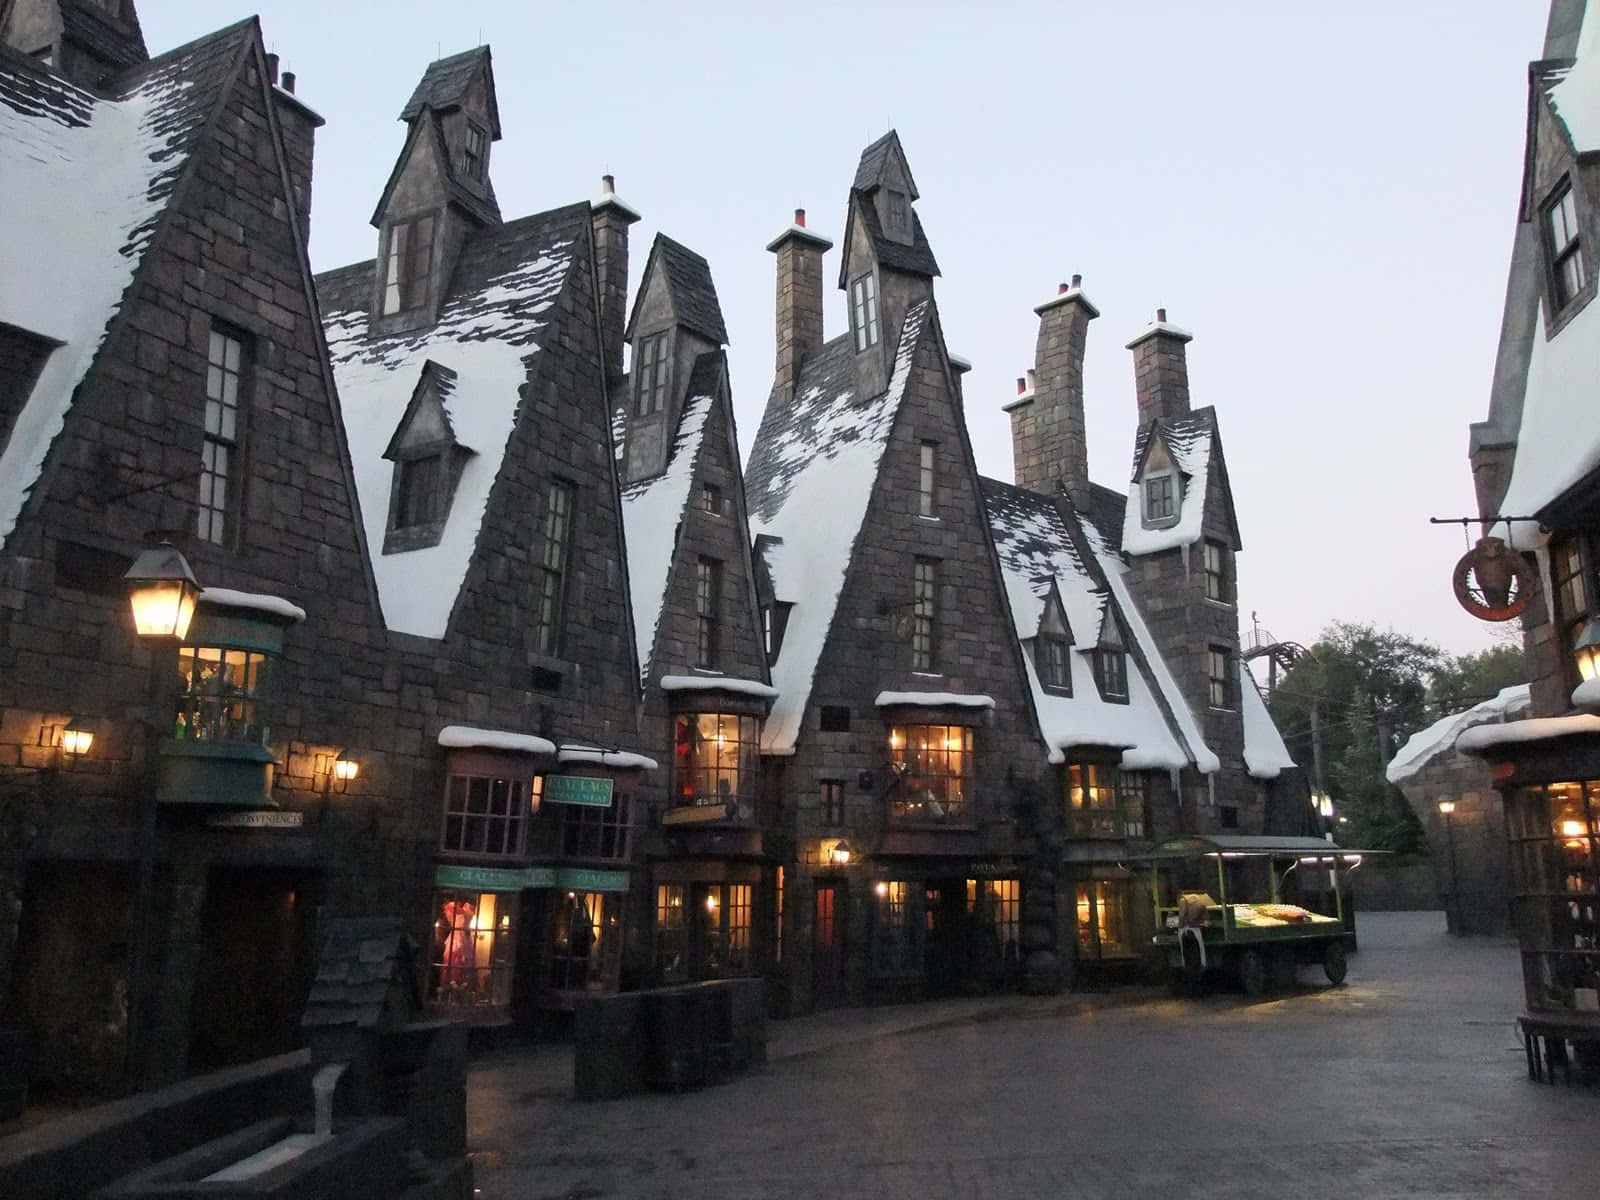 Captivating Scenery of Hogsmeade Village during Winter Wallpaper